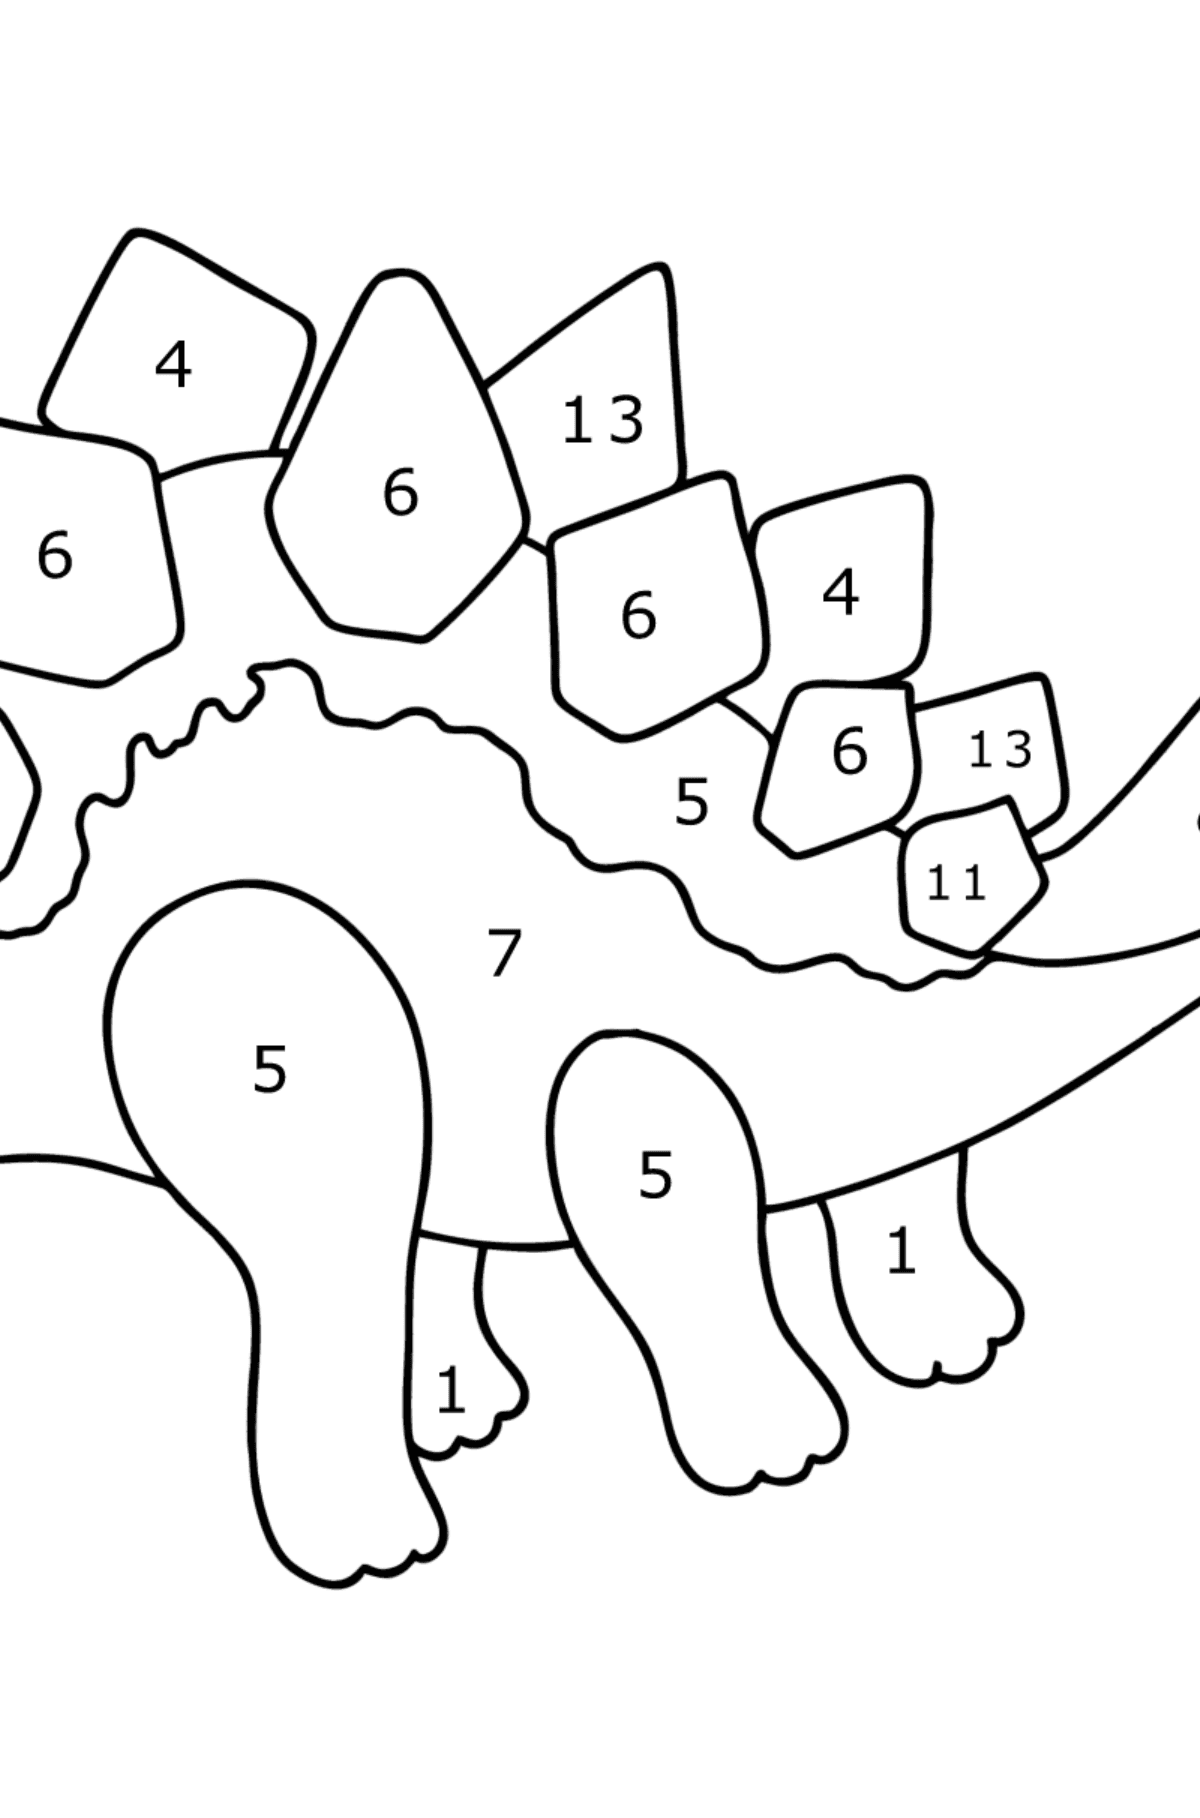 Stegosaurus coloring page - Coloring by Numbers for Kids